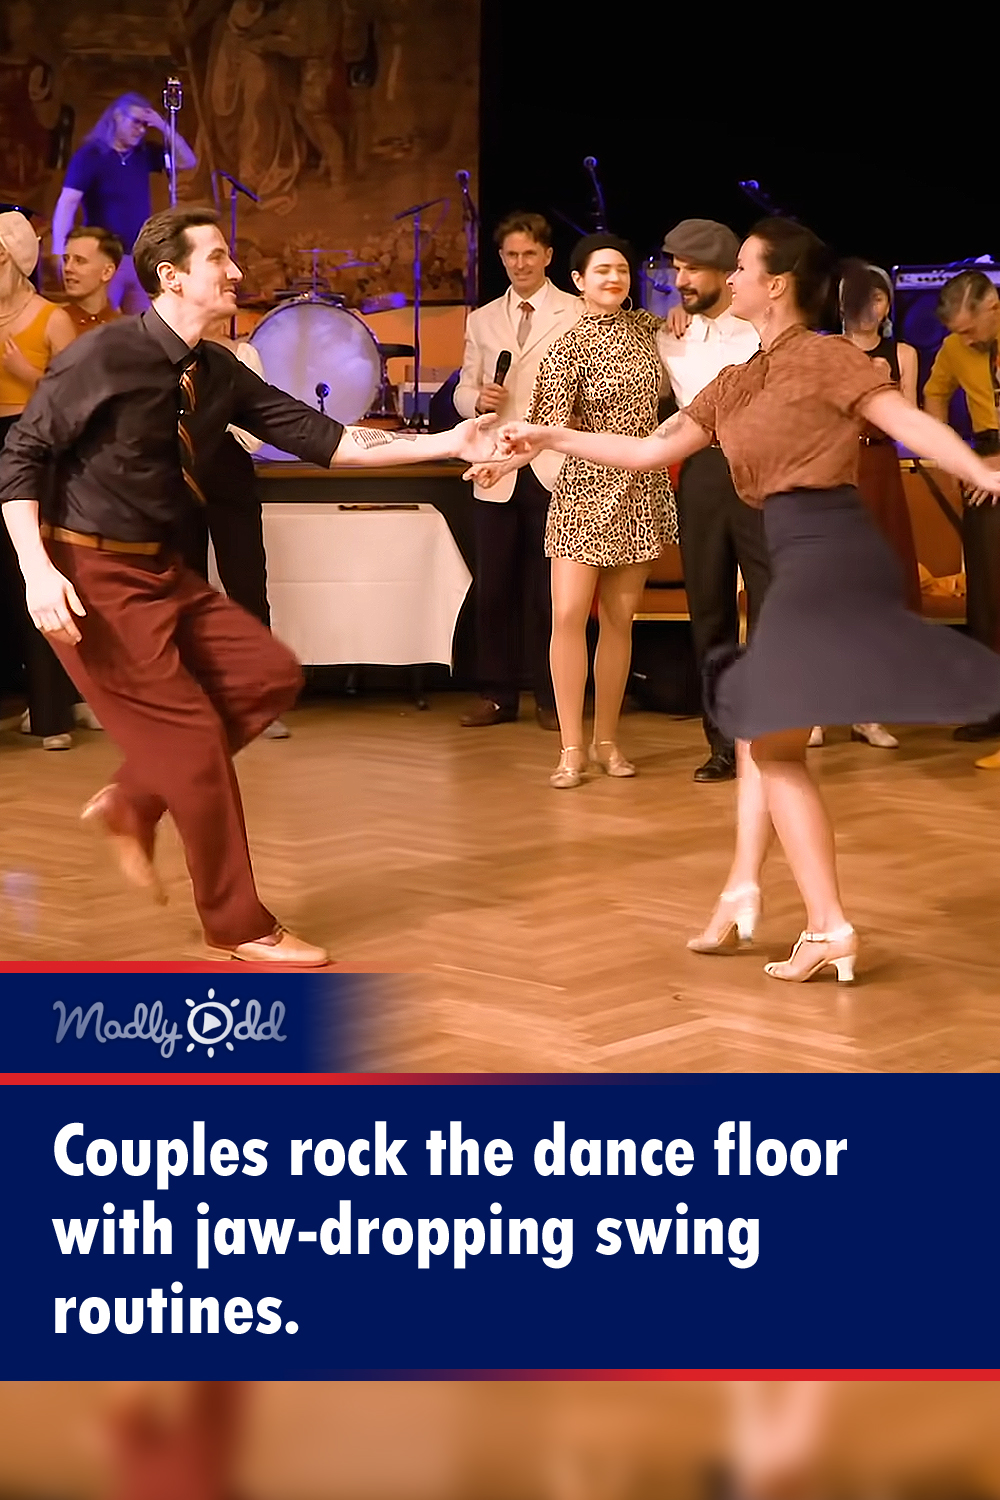 Couples rock the dance floor with jaw-dropping swing routines